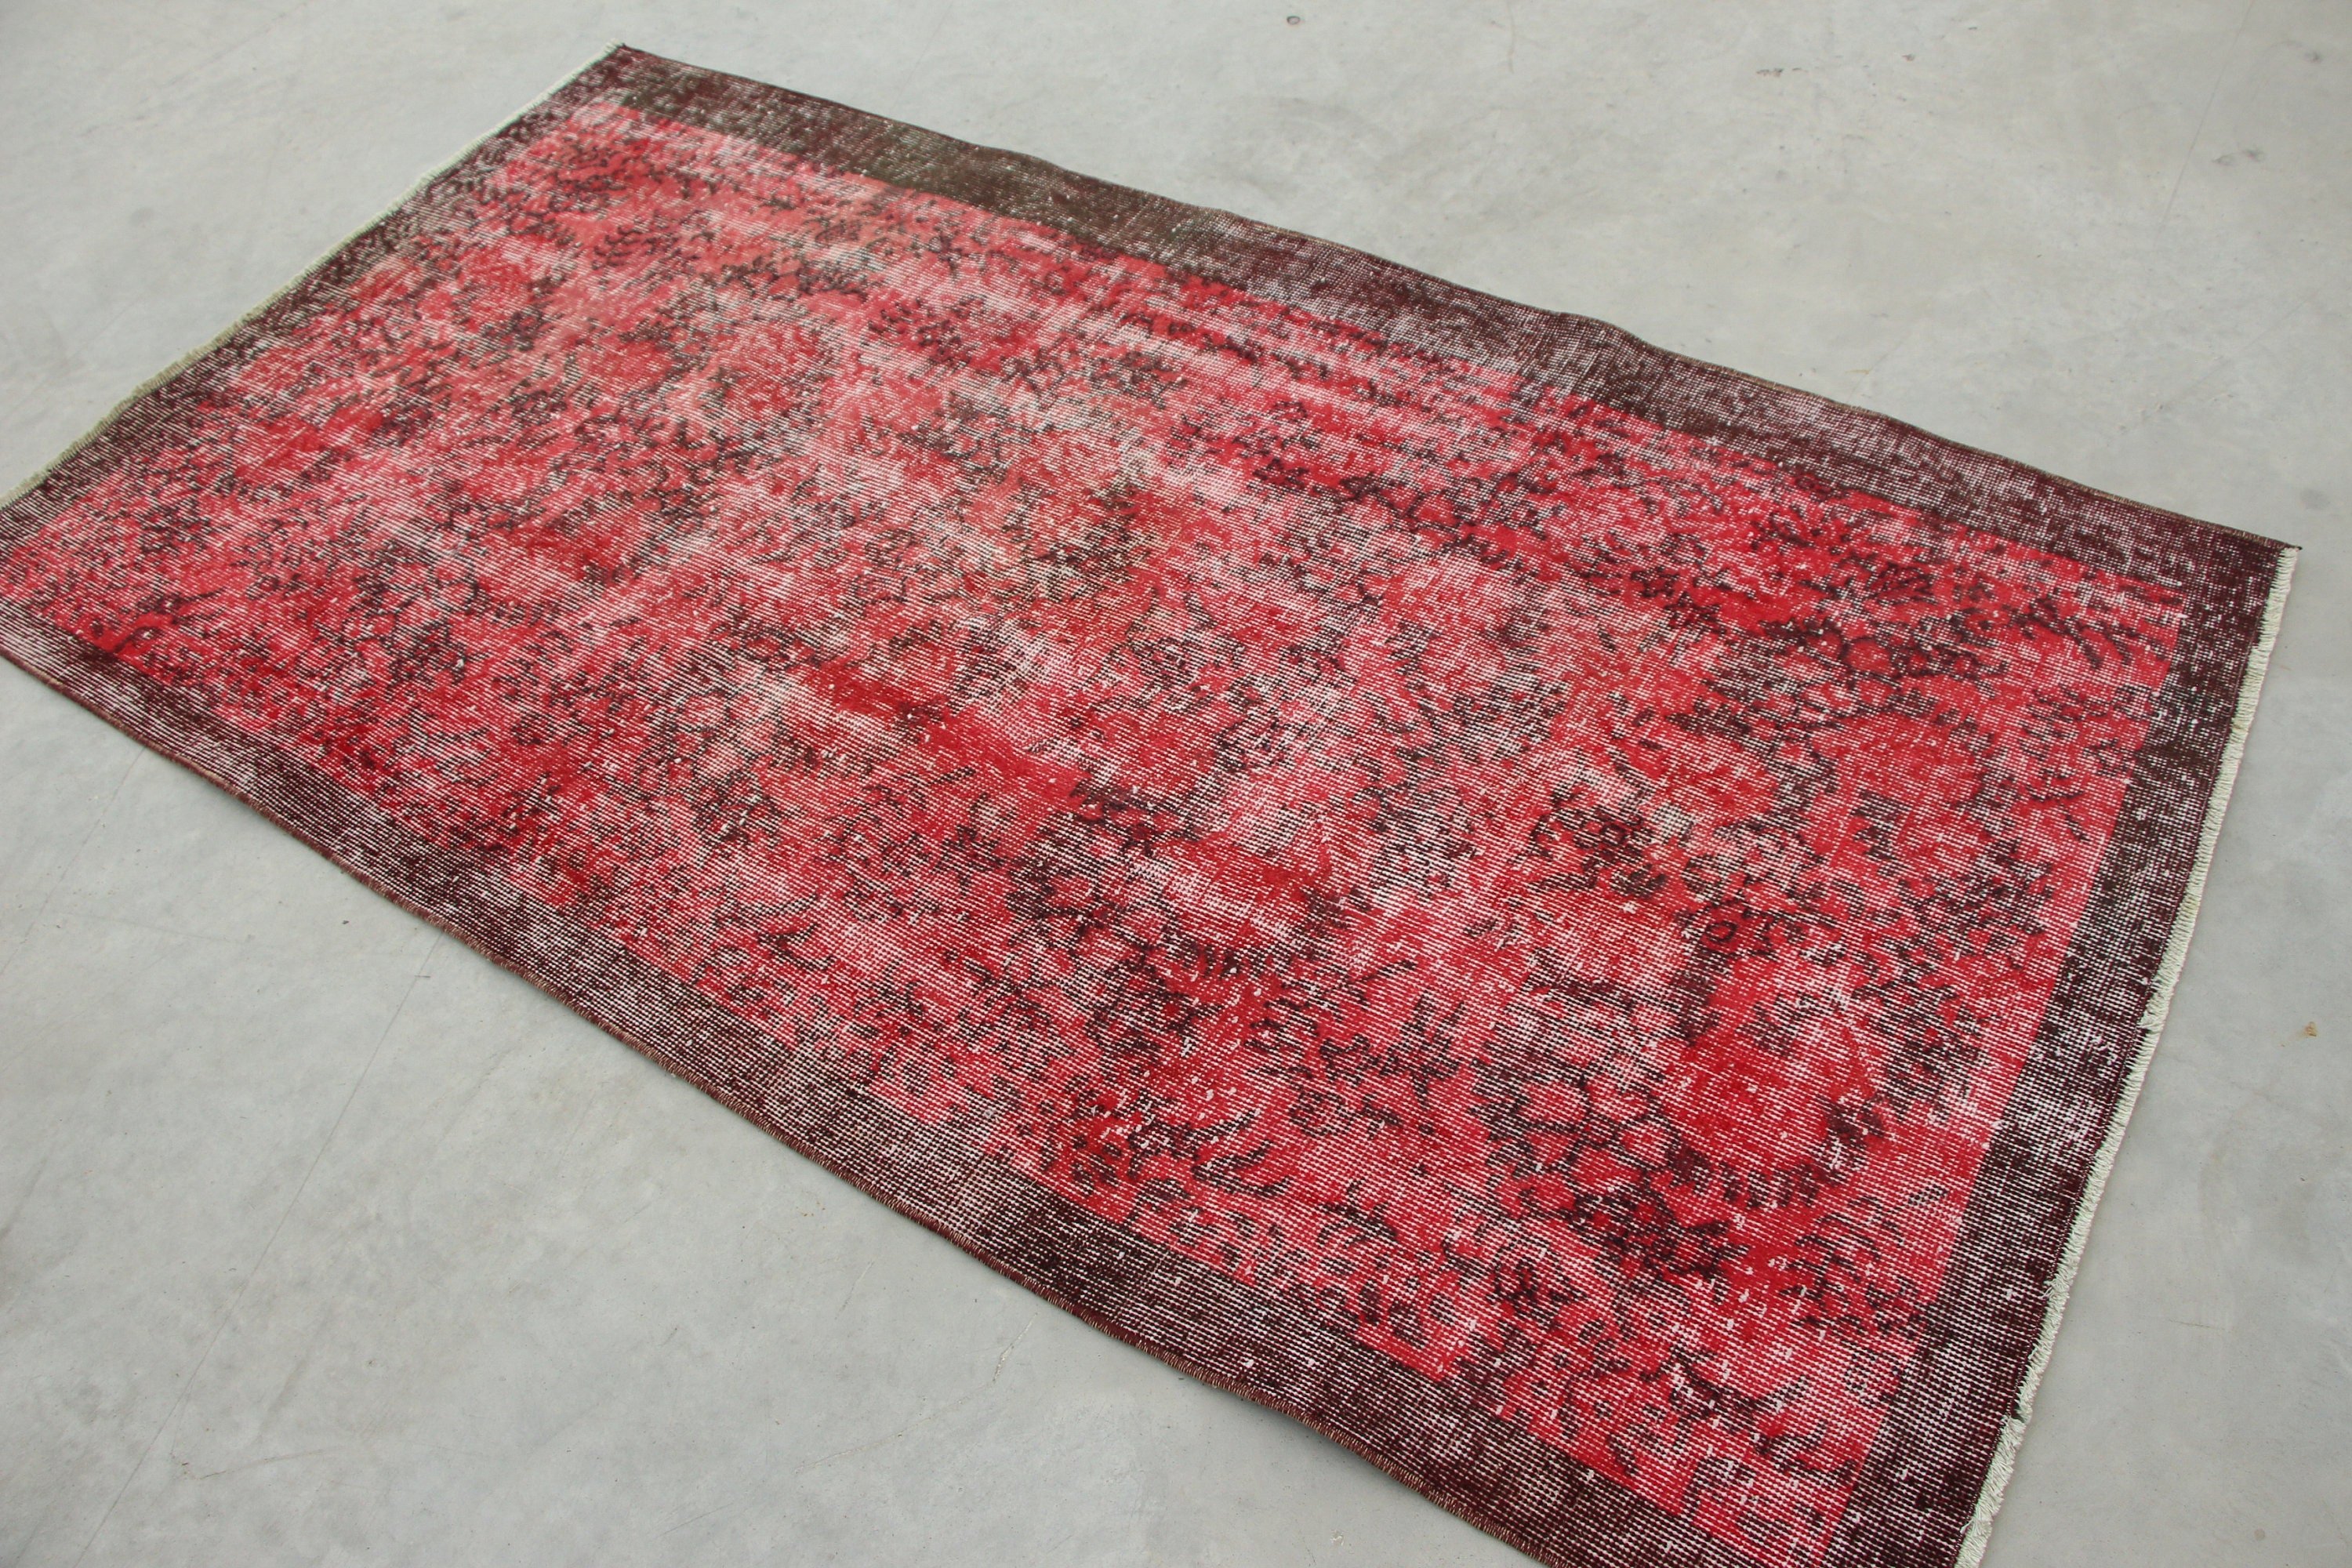 Rugs for Bedroom, Cool Rugs, 3.6x6.6 ft Accent Rug, Bedroom Rugs, Muted Rug, Moroccan Rugs, Turkish Rugs, Vintage Rug, Red Kitchen Rug